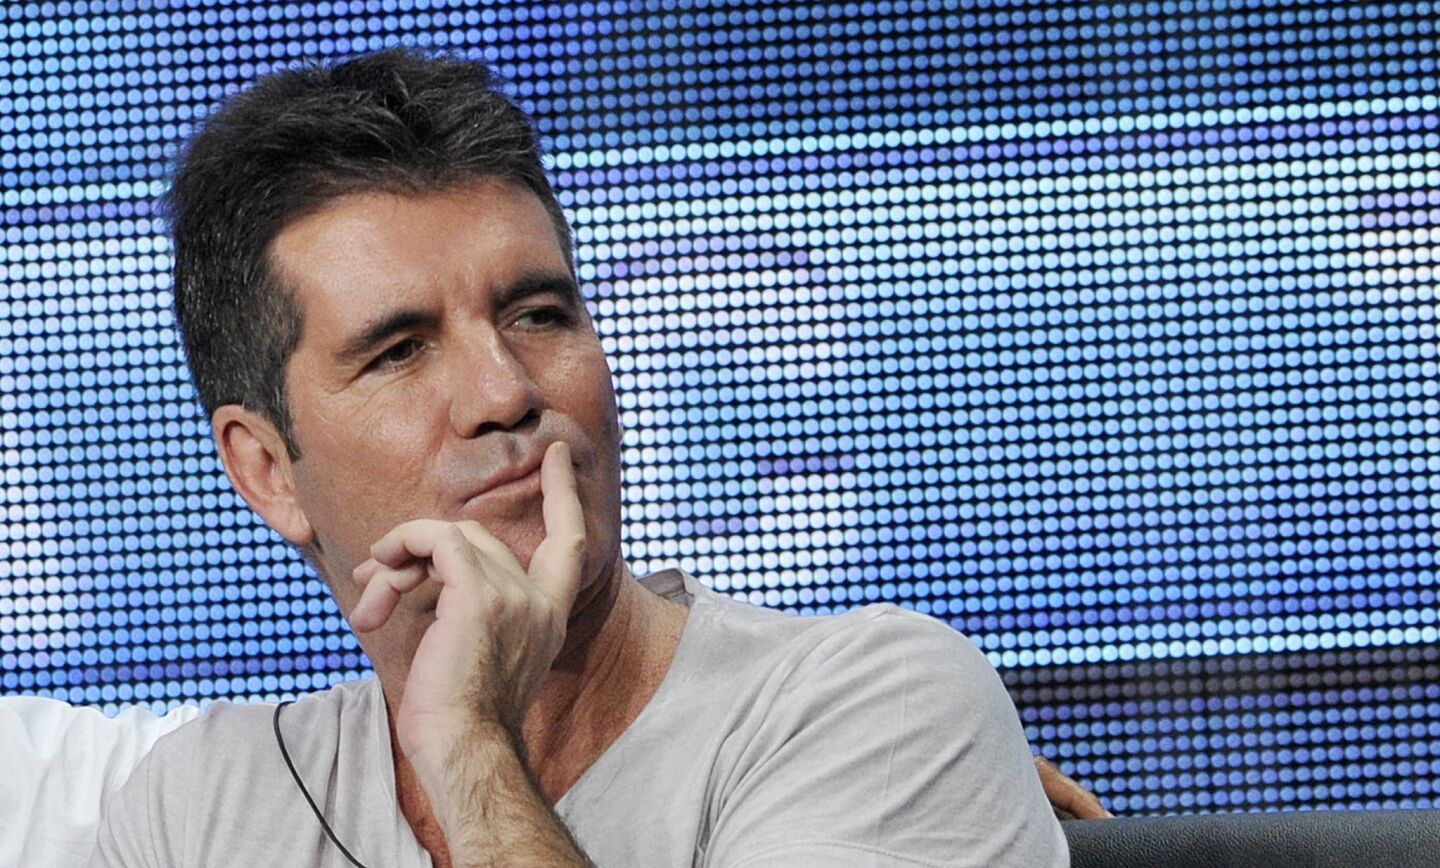 "X Factor" mastermind Simon Cowell is expecting a baby with New York socialite Lauren Silverman, the estranged wife of one of the talent-show judge's good friends Andrew Silverman, who he met reportedly through Lauren.MORE:Simon Cowell expecting a baby with friend's estranged wife